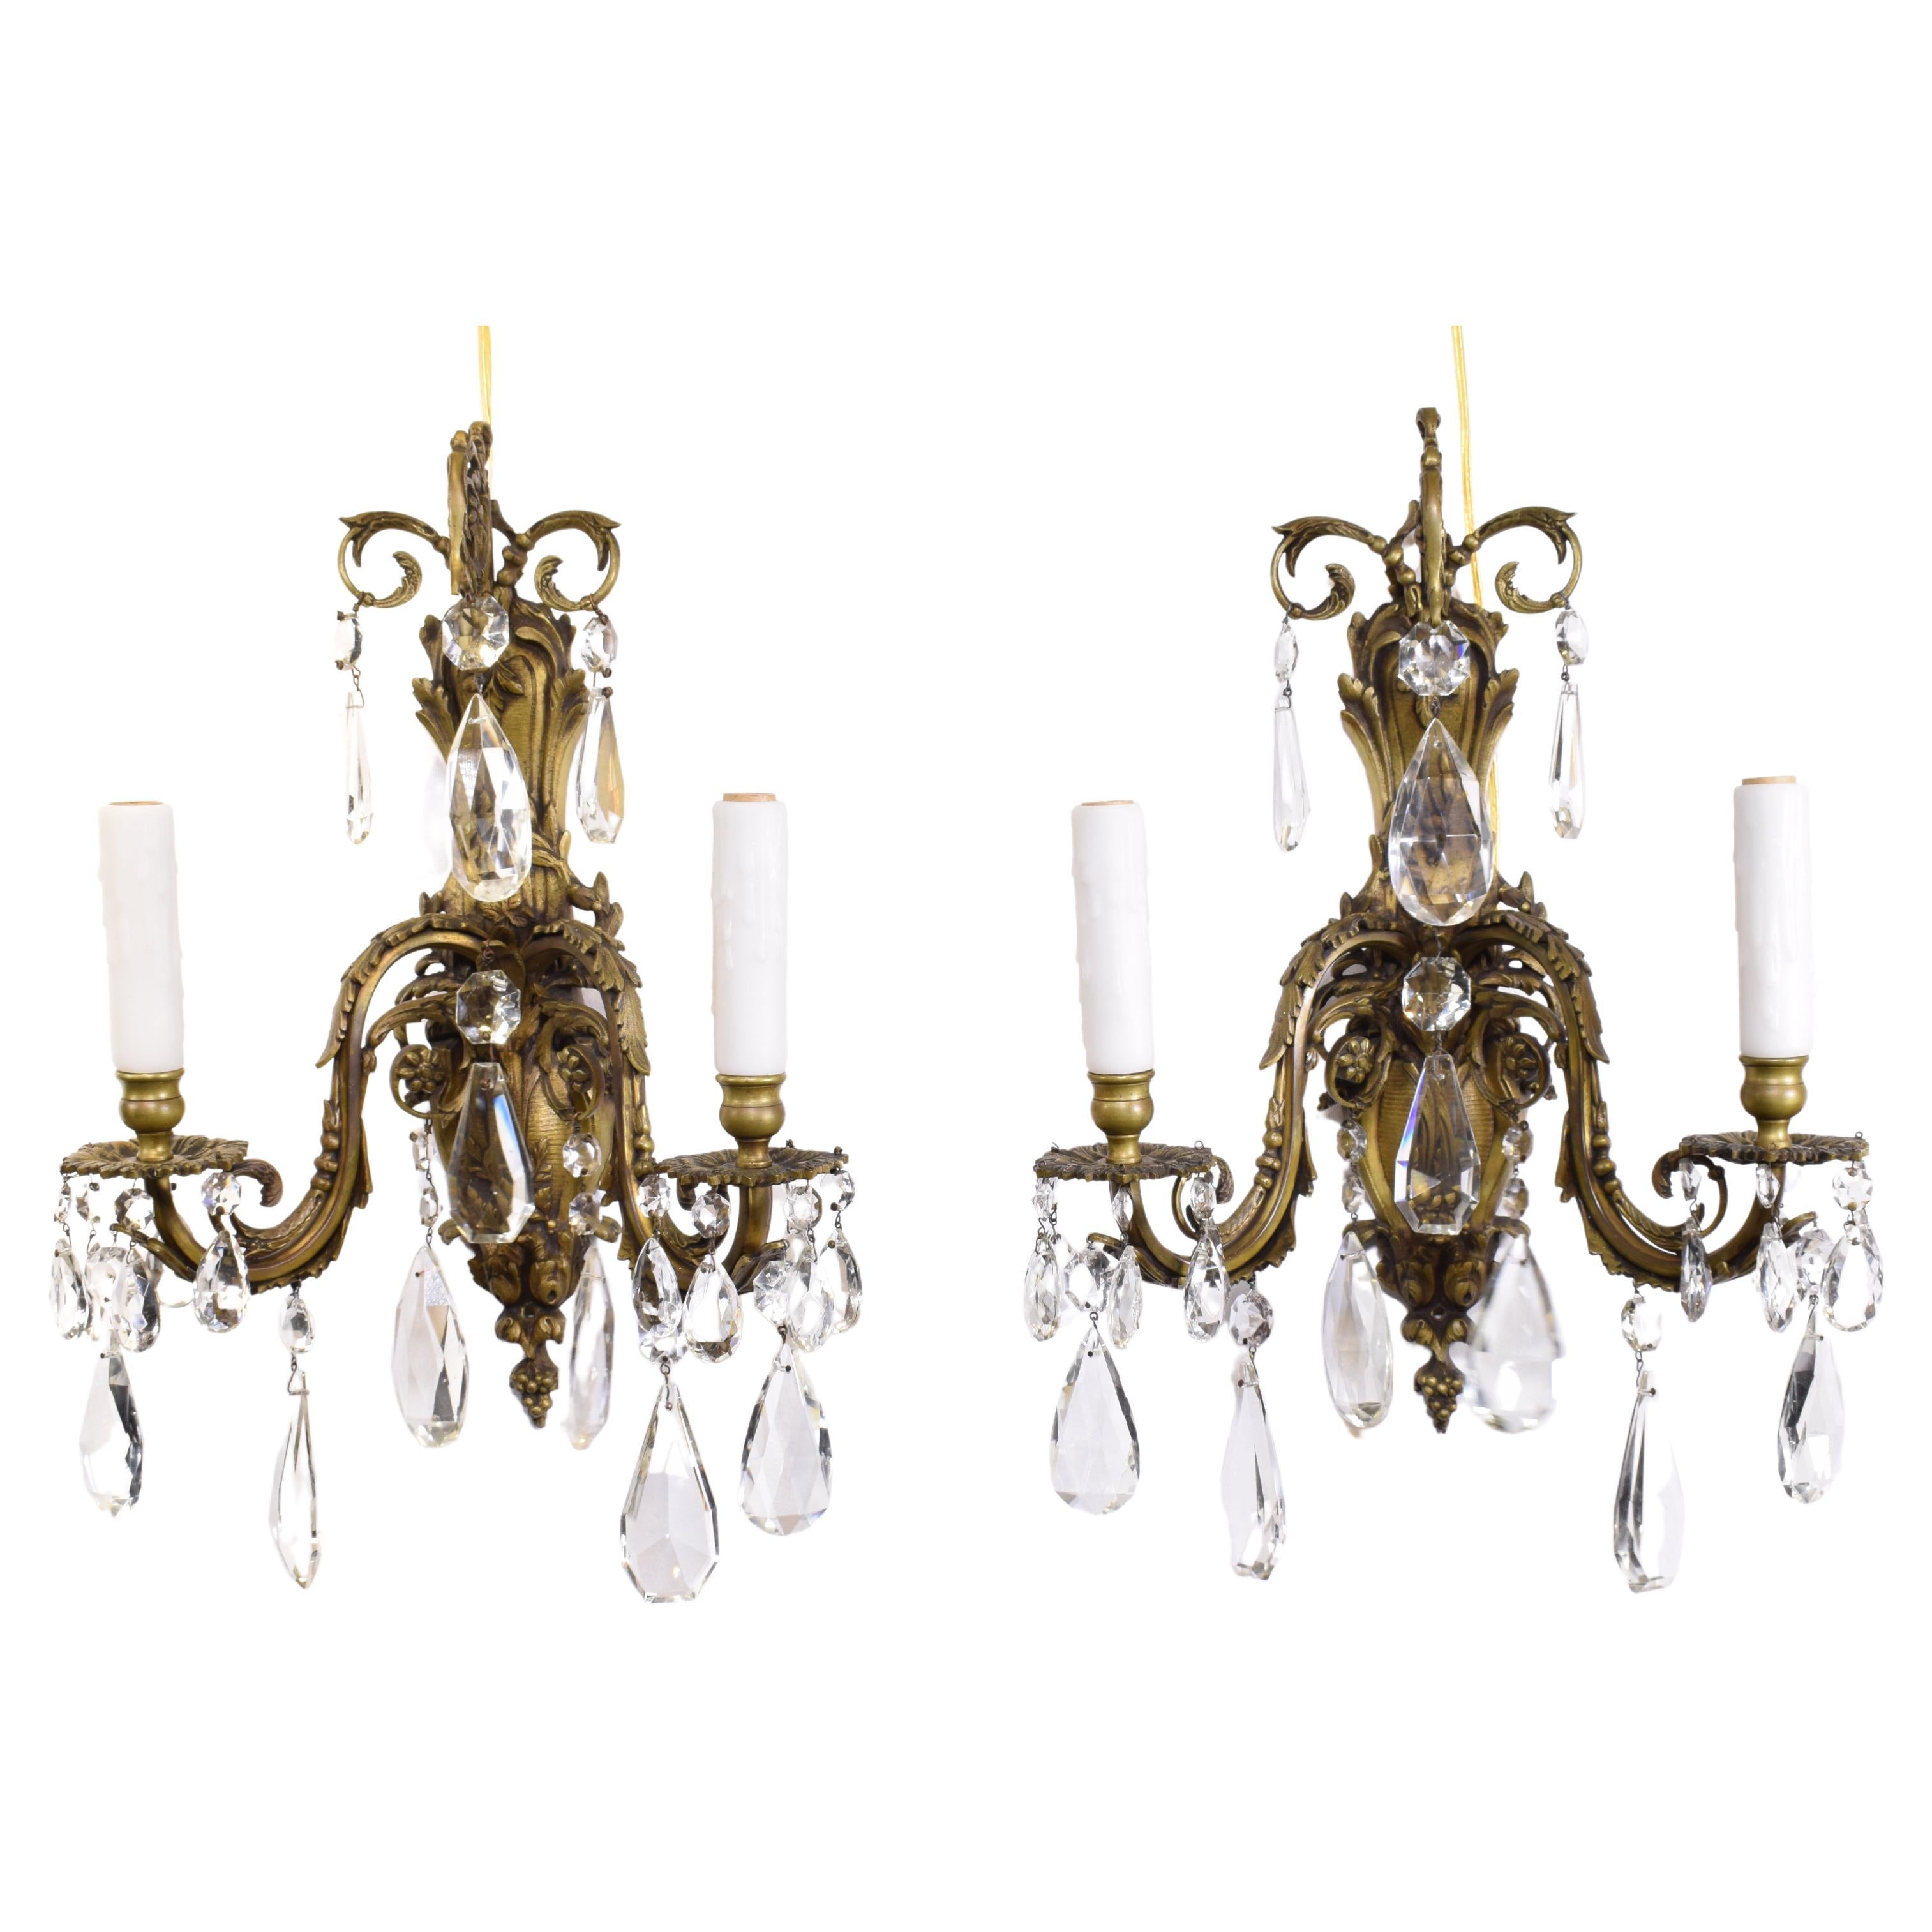 A Fine Pair Of Gilt Bronze & Crystal Wall Sconces For Sale